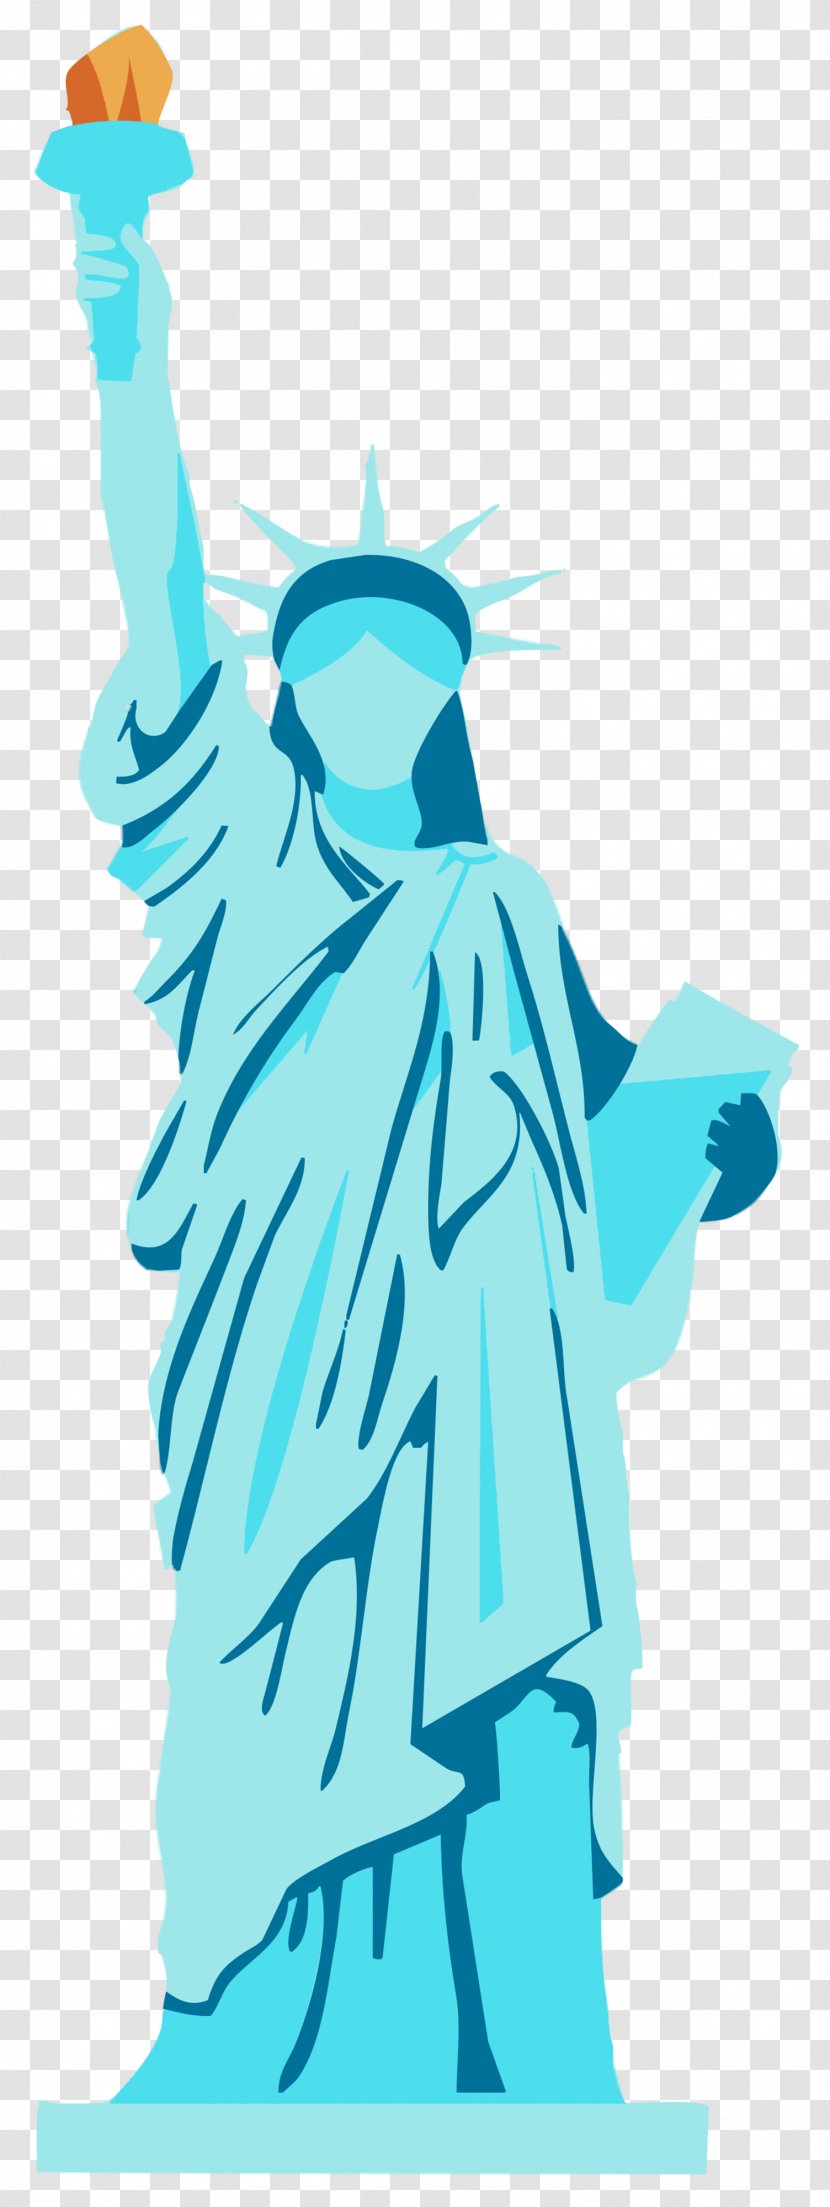 Clip Art Illustration Graphic Design Cartoon Character - Fictional - Lady Liberty Silhouette Transparent PNG